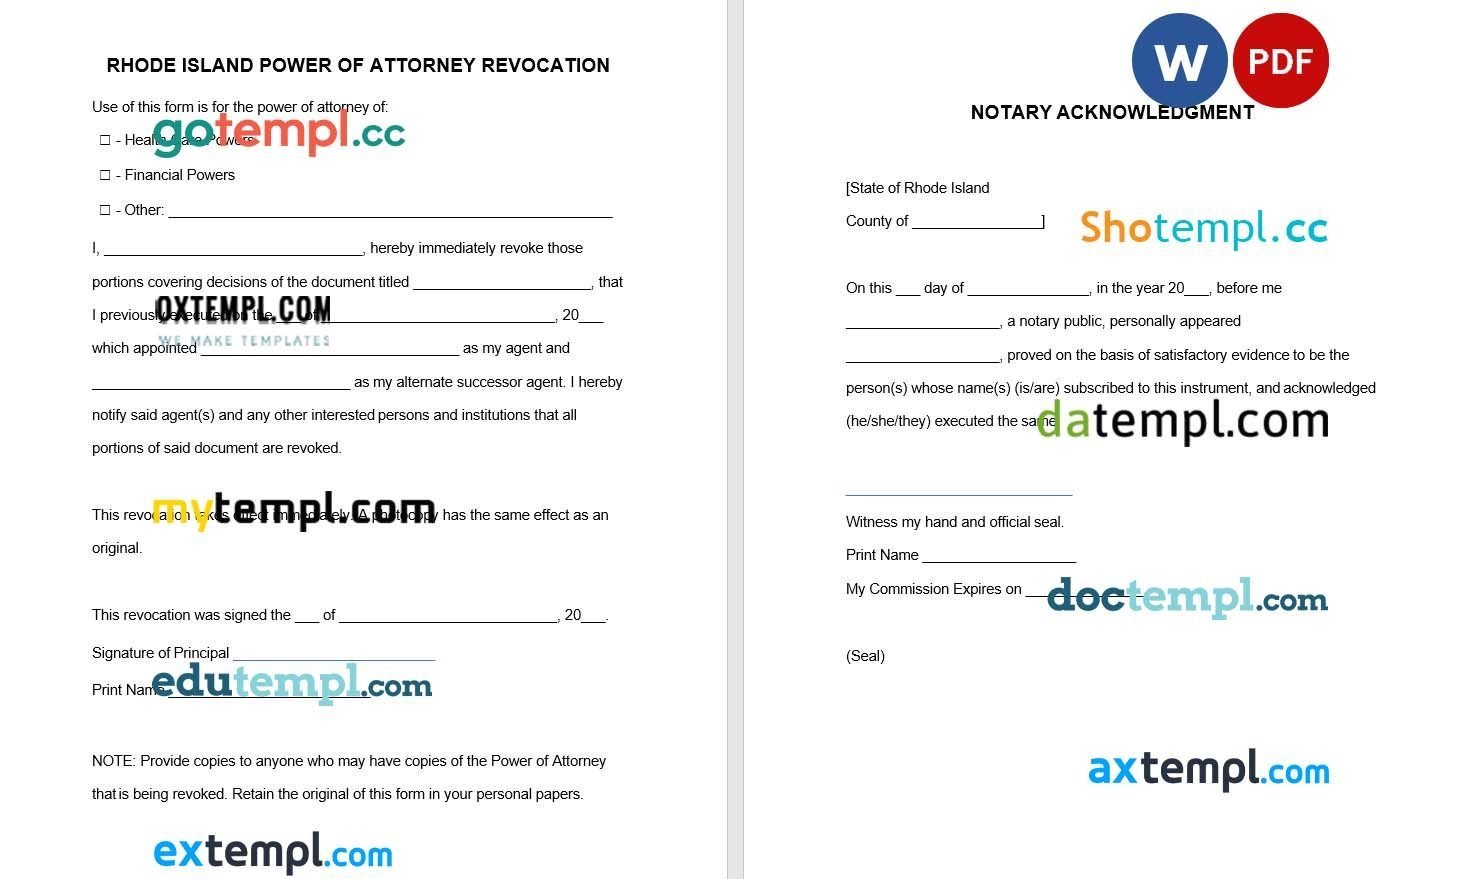 Rhode Island Power of Attorney Revocation Form example, fully editable